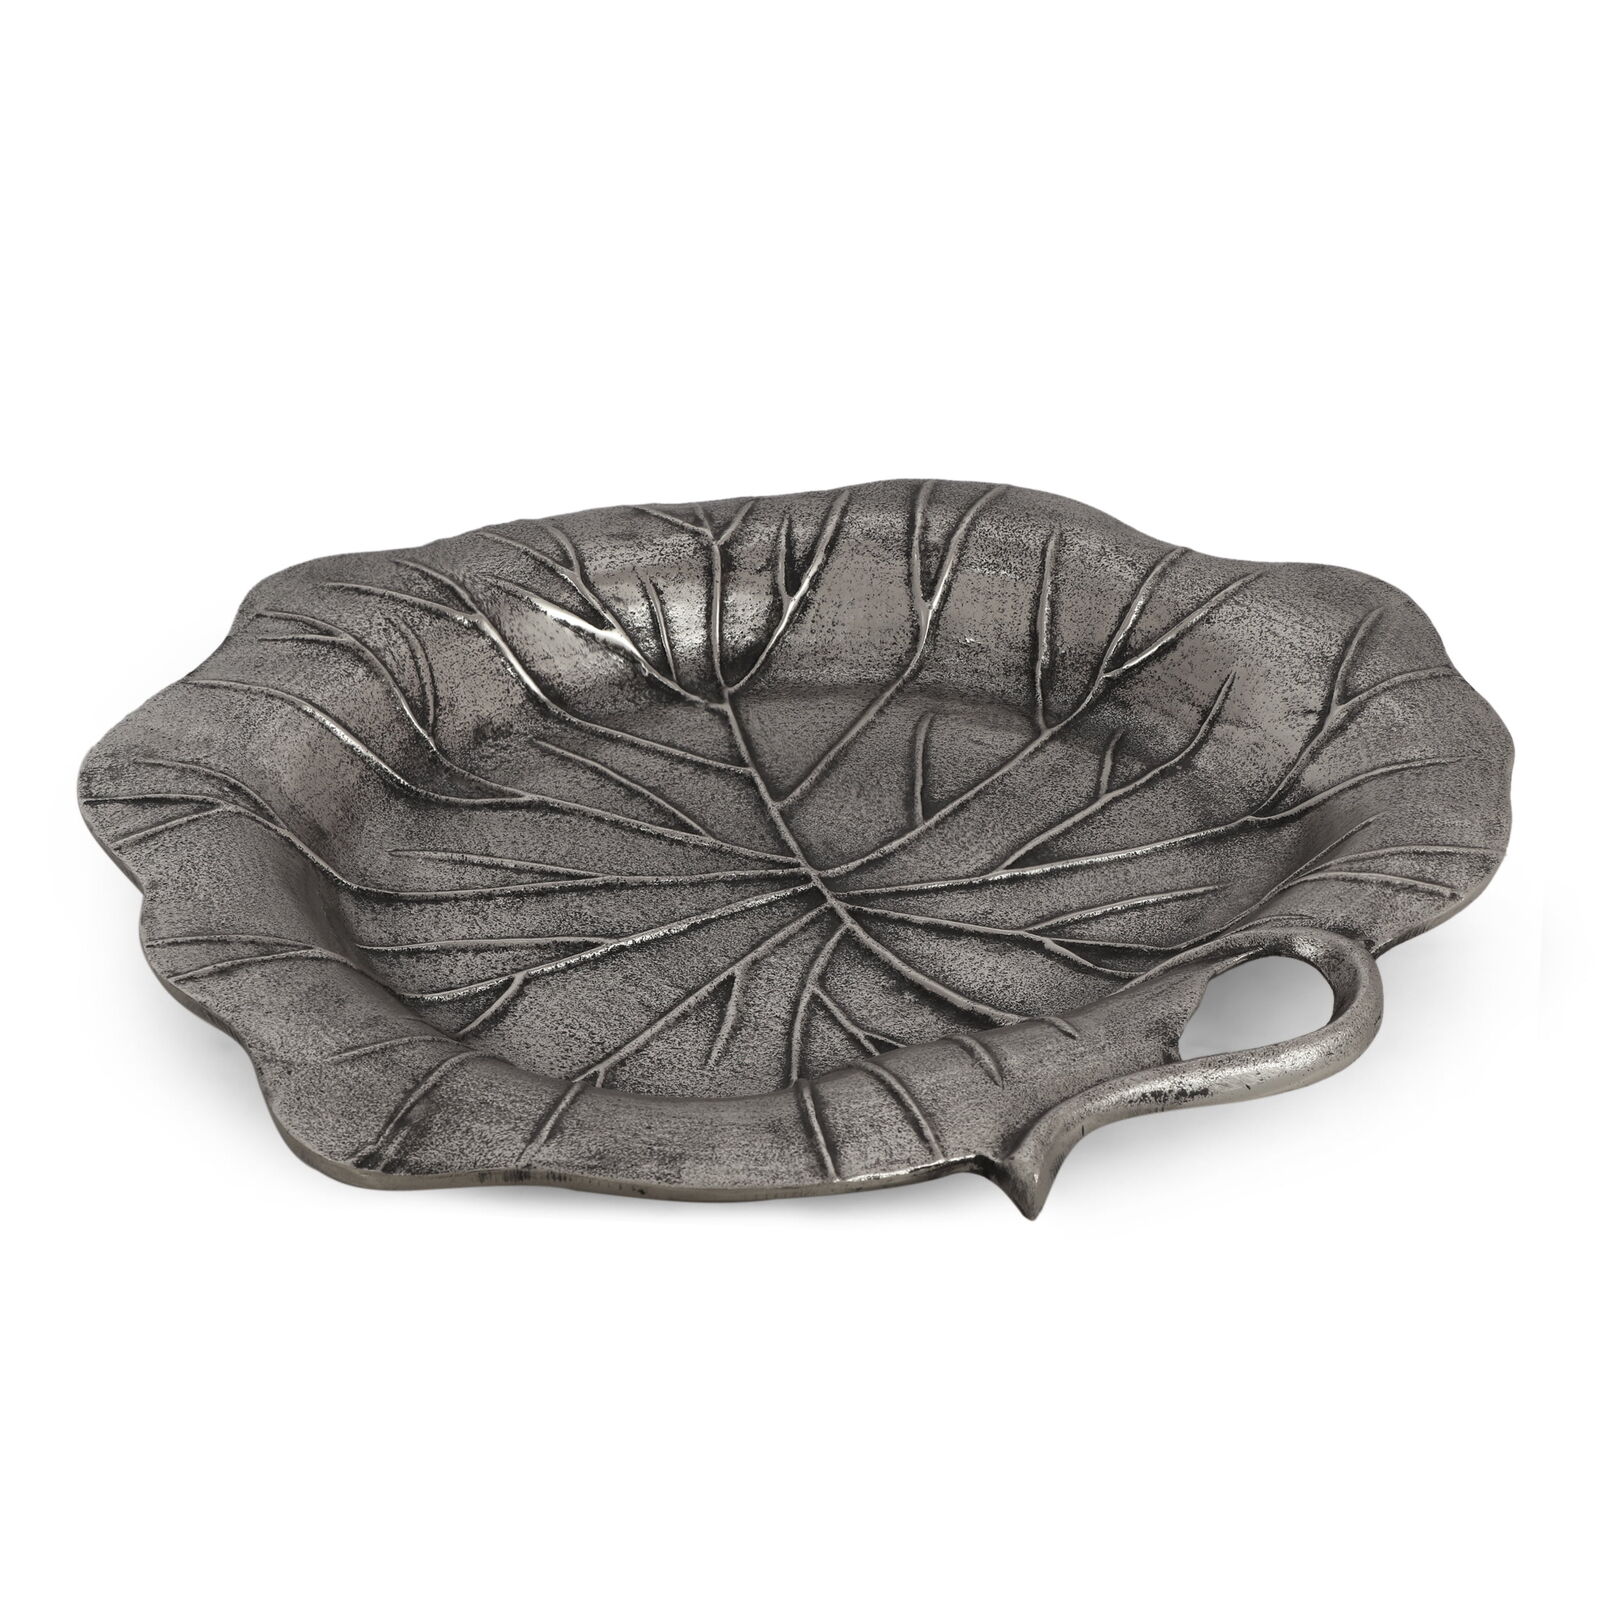 Noble House Sparks Aluminum Handcrafted Leaf Dish, Antique Nickel